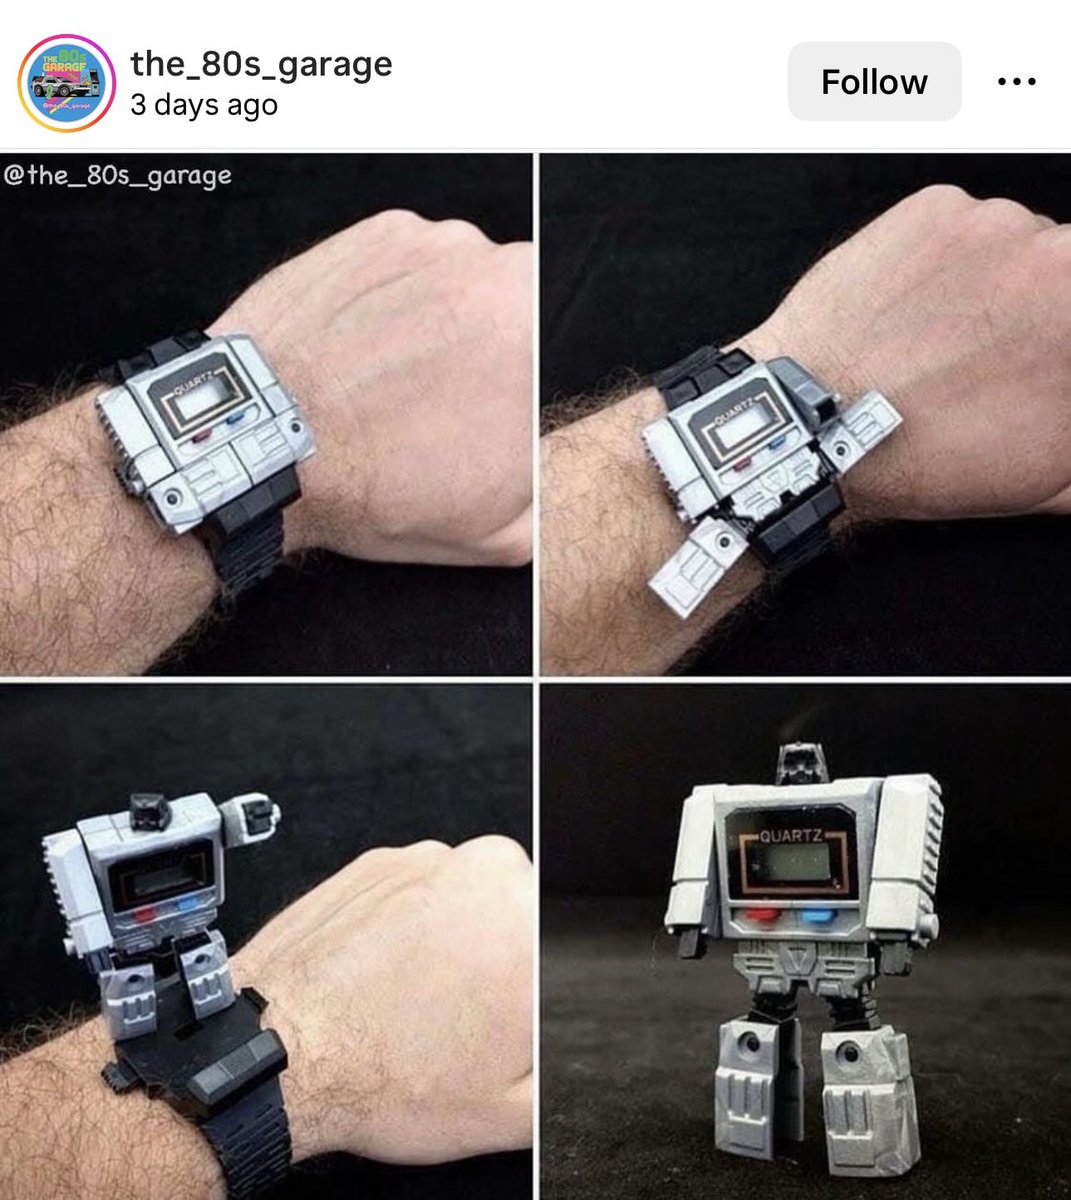 Check out this Transformers watch 😂. Who else sported on of these?

Credit to Instagram user @the_80s_garage
instagram.com/the_80s_garage

#transformers #watch #meme #funny